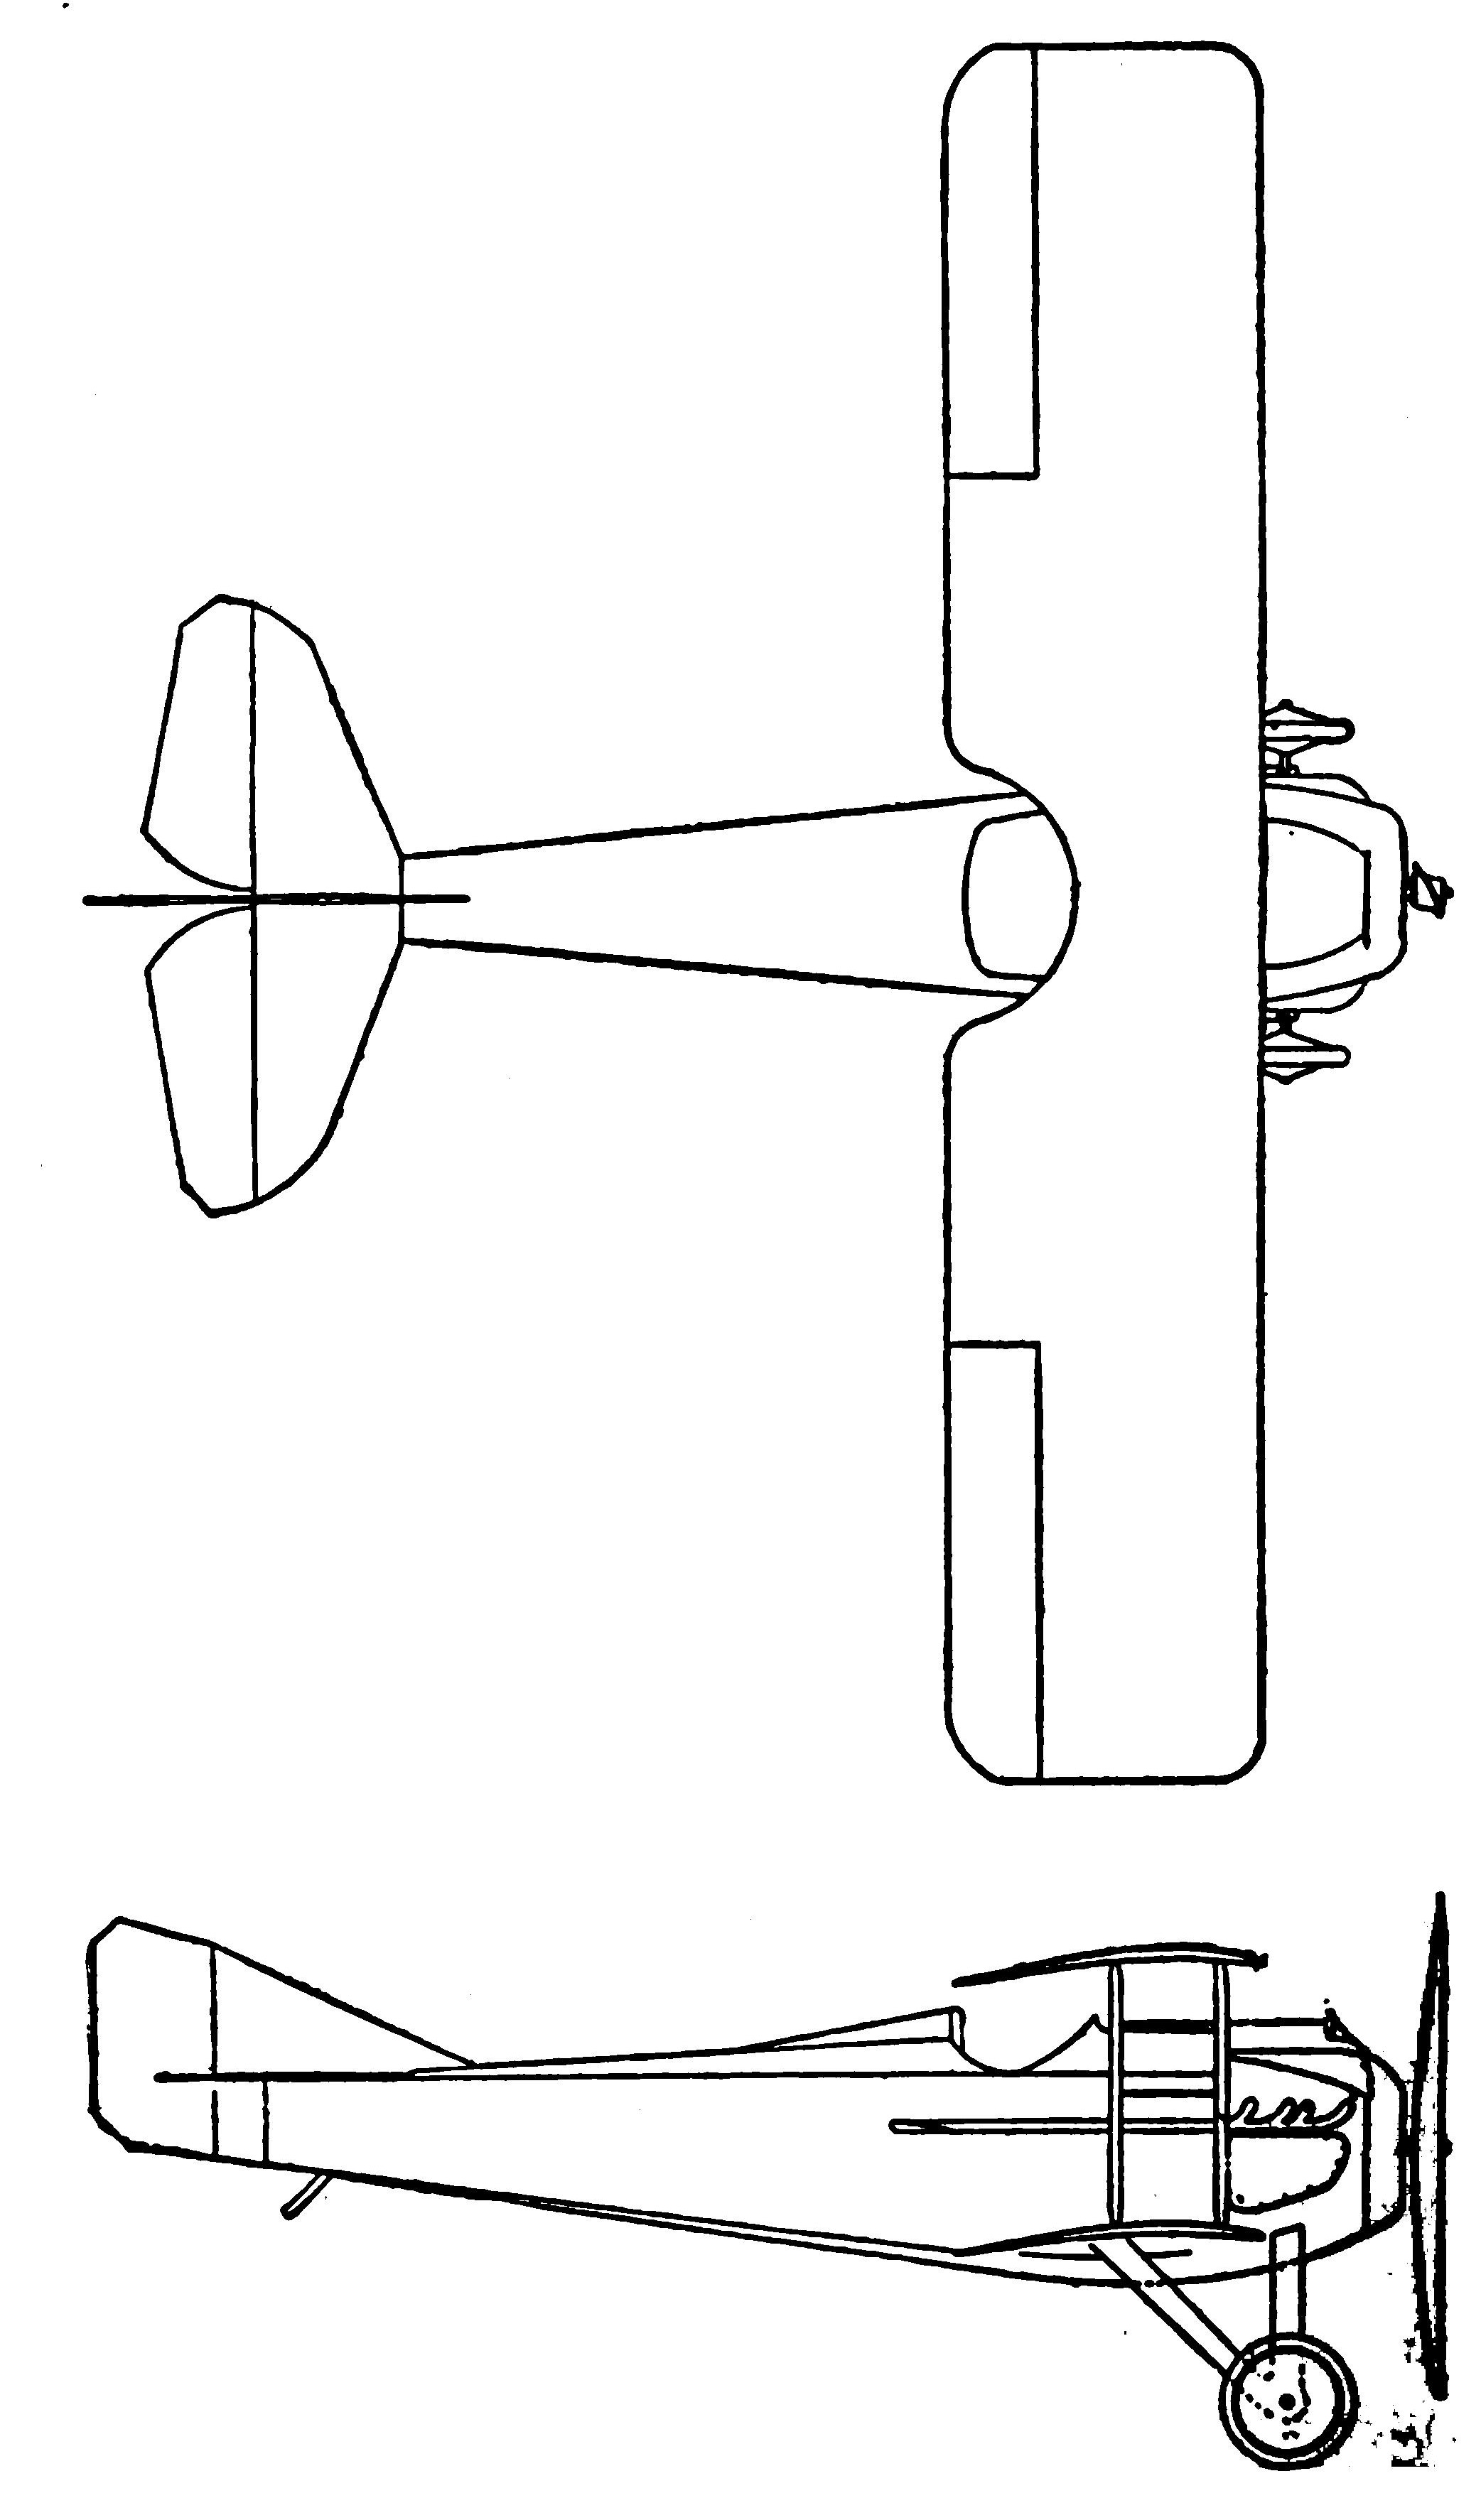 Plan and Side Elevation of the S.P.A.D. Speed Scout. Courtesy "Aerial Age".